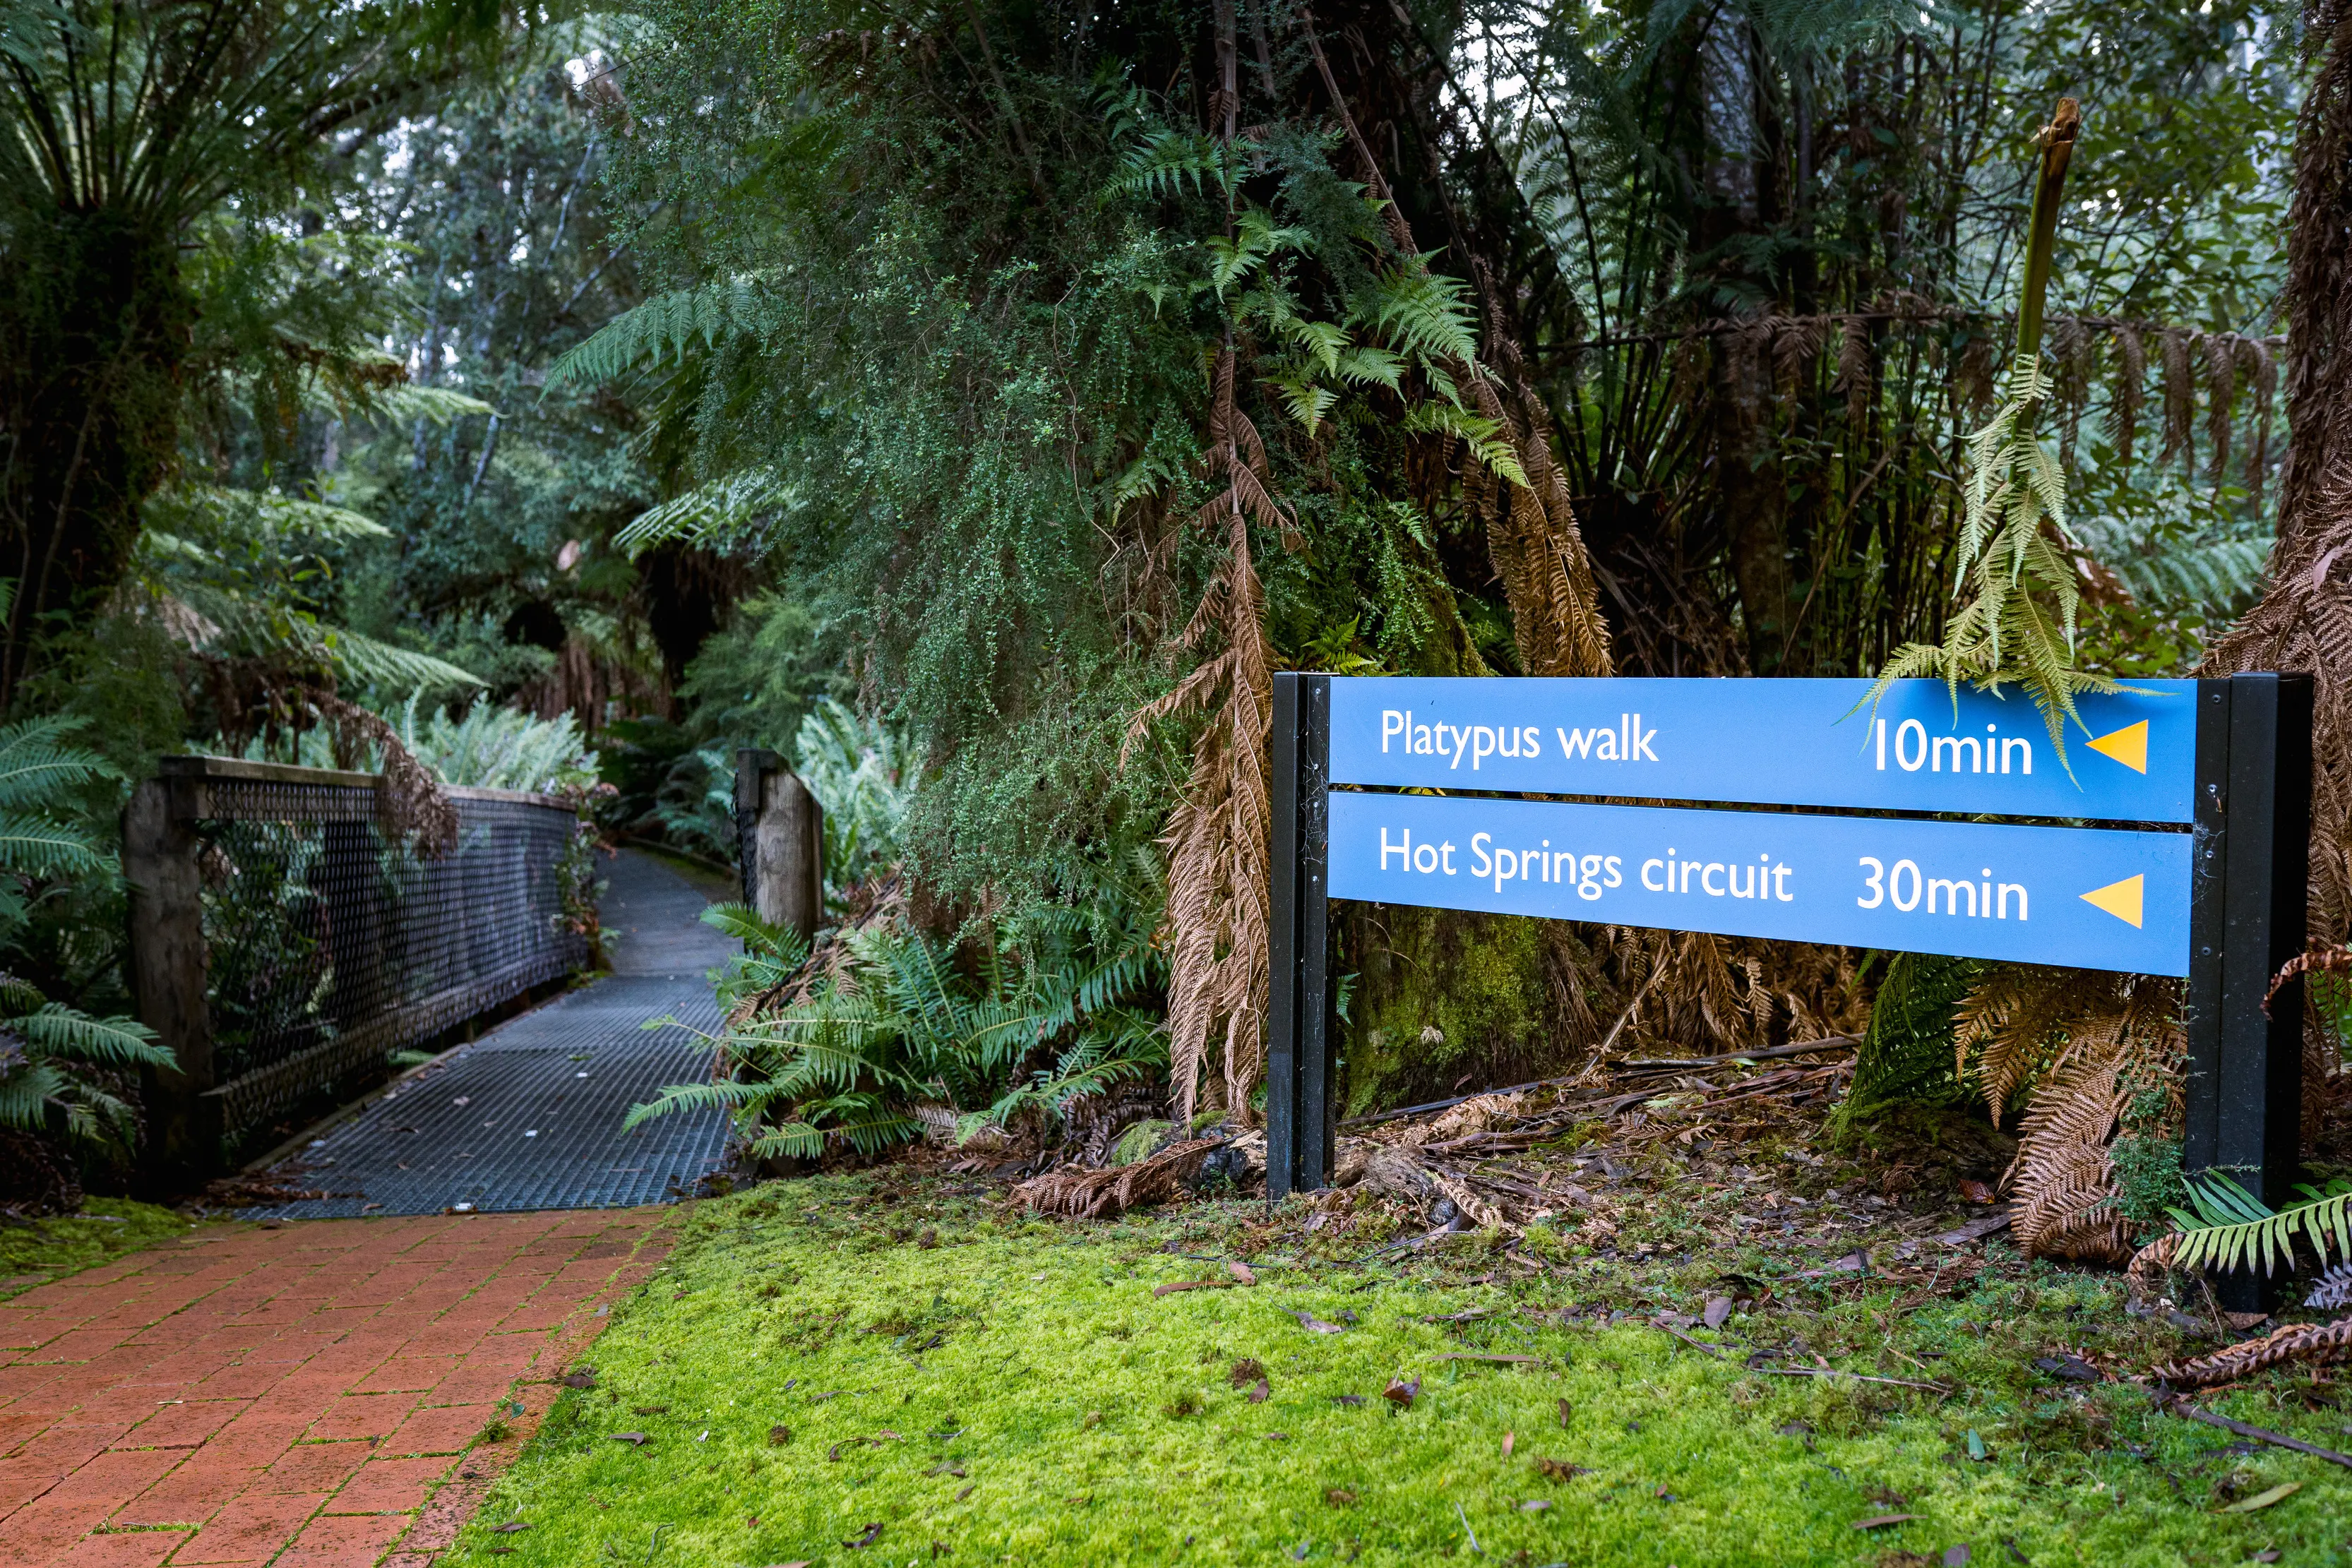 A walking path leads into a forest with a sign showing 30 minutes to do the Hot Springs circuit. At Hastings Caves and Thermal Springs.